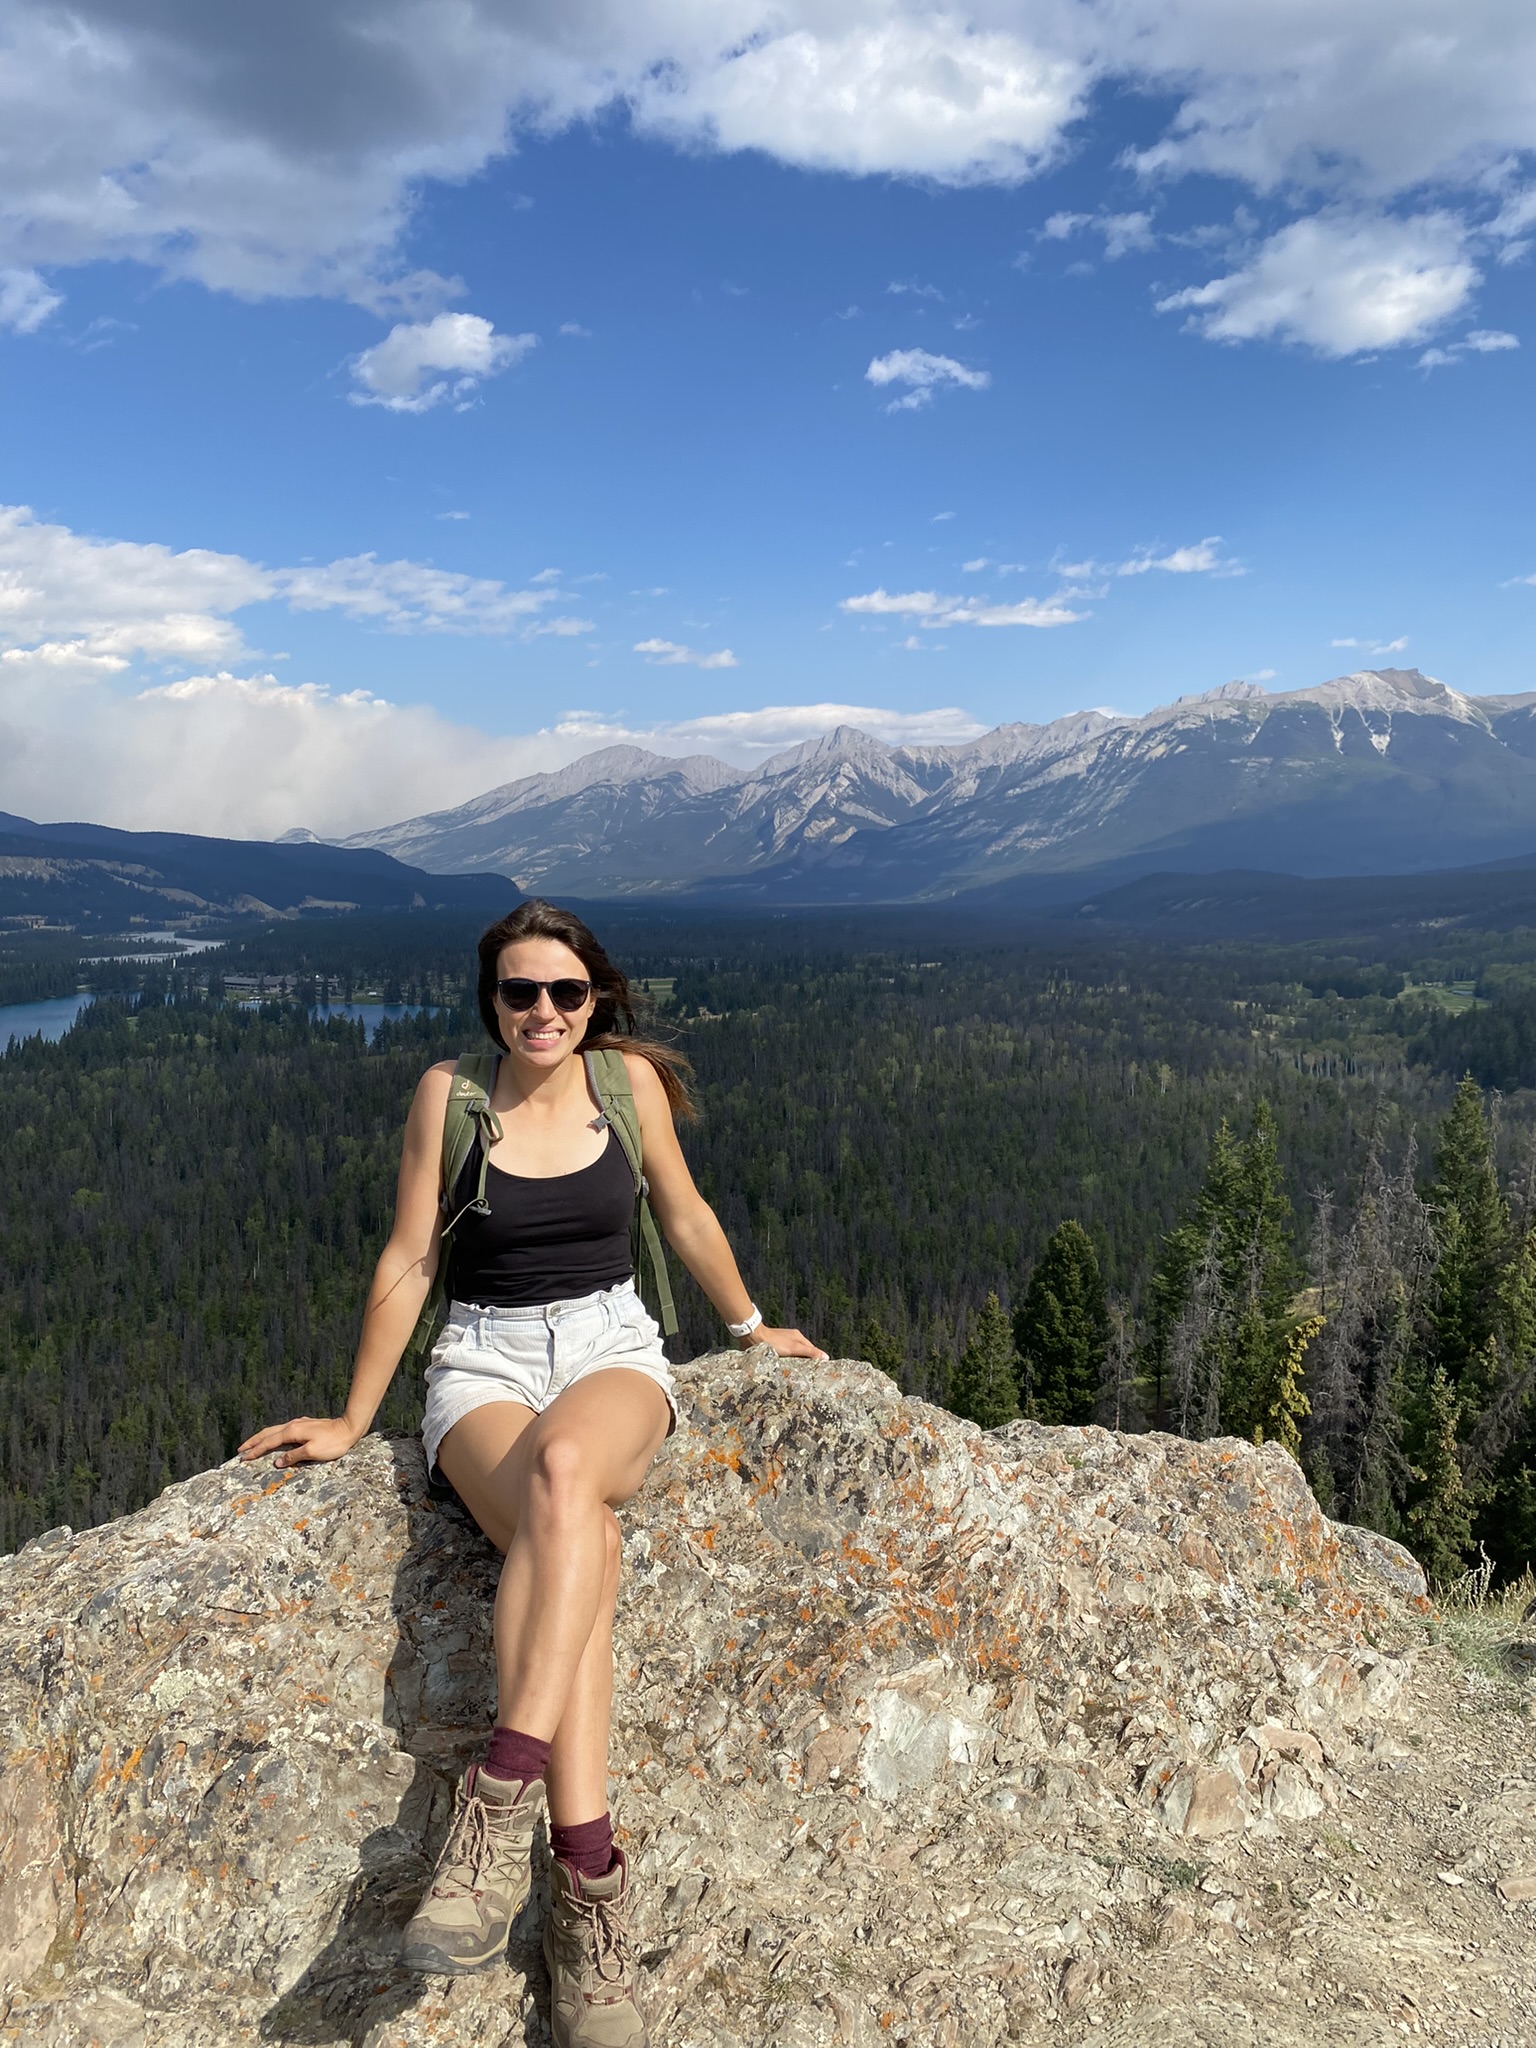 life and business coach ana mcrae on top of rocky mountains